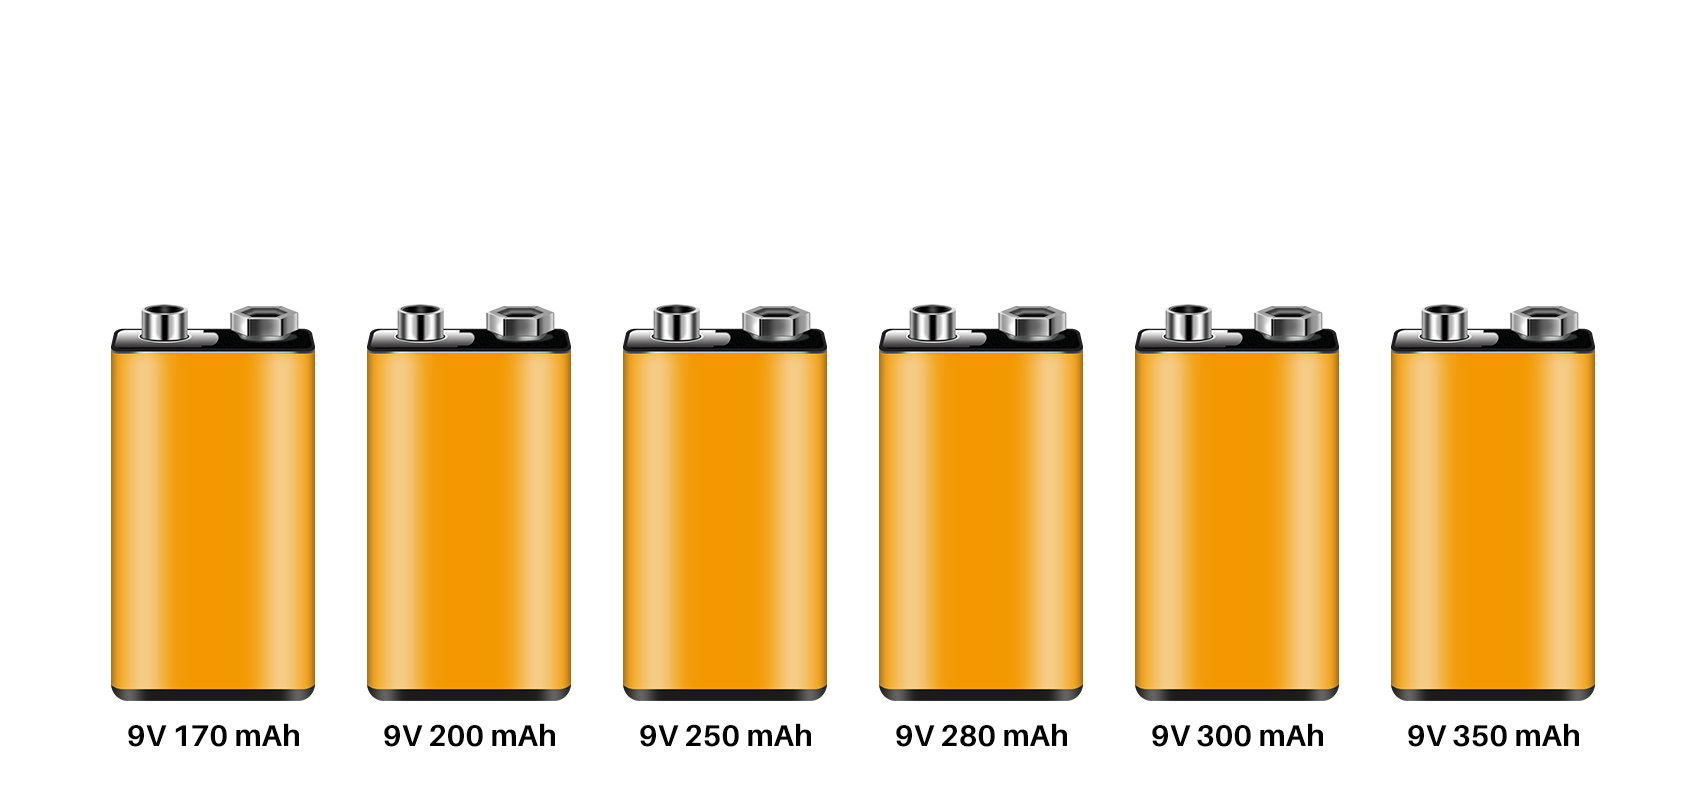 9V NiMH Battery with different Capacities